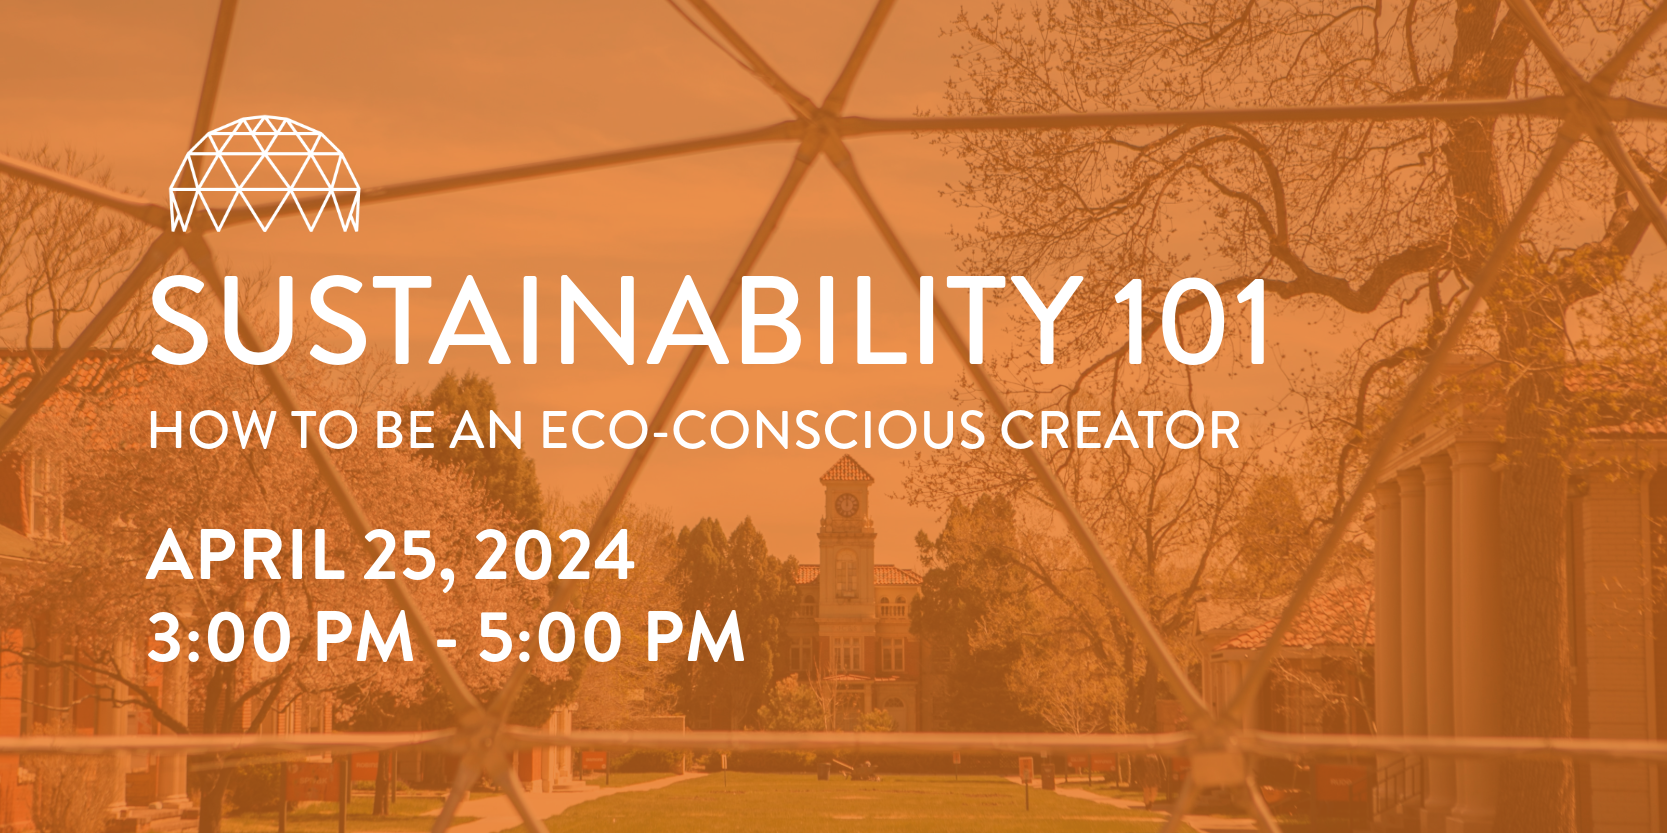 Sustainability 101: How To Be An Eco-Conscious Creator